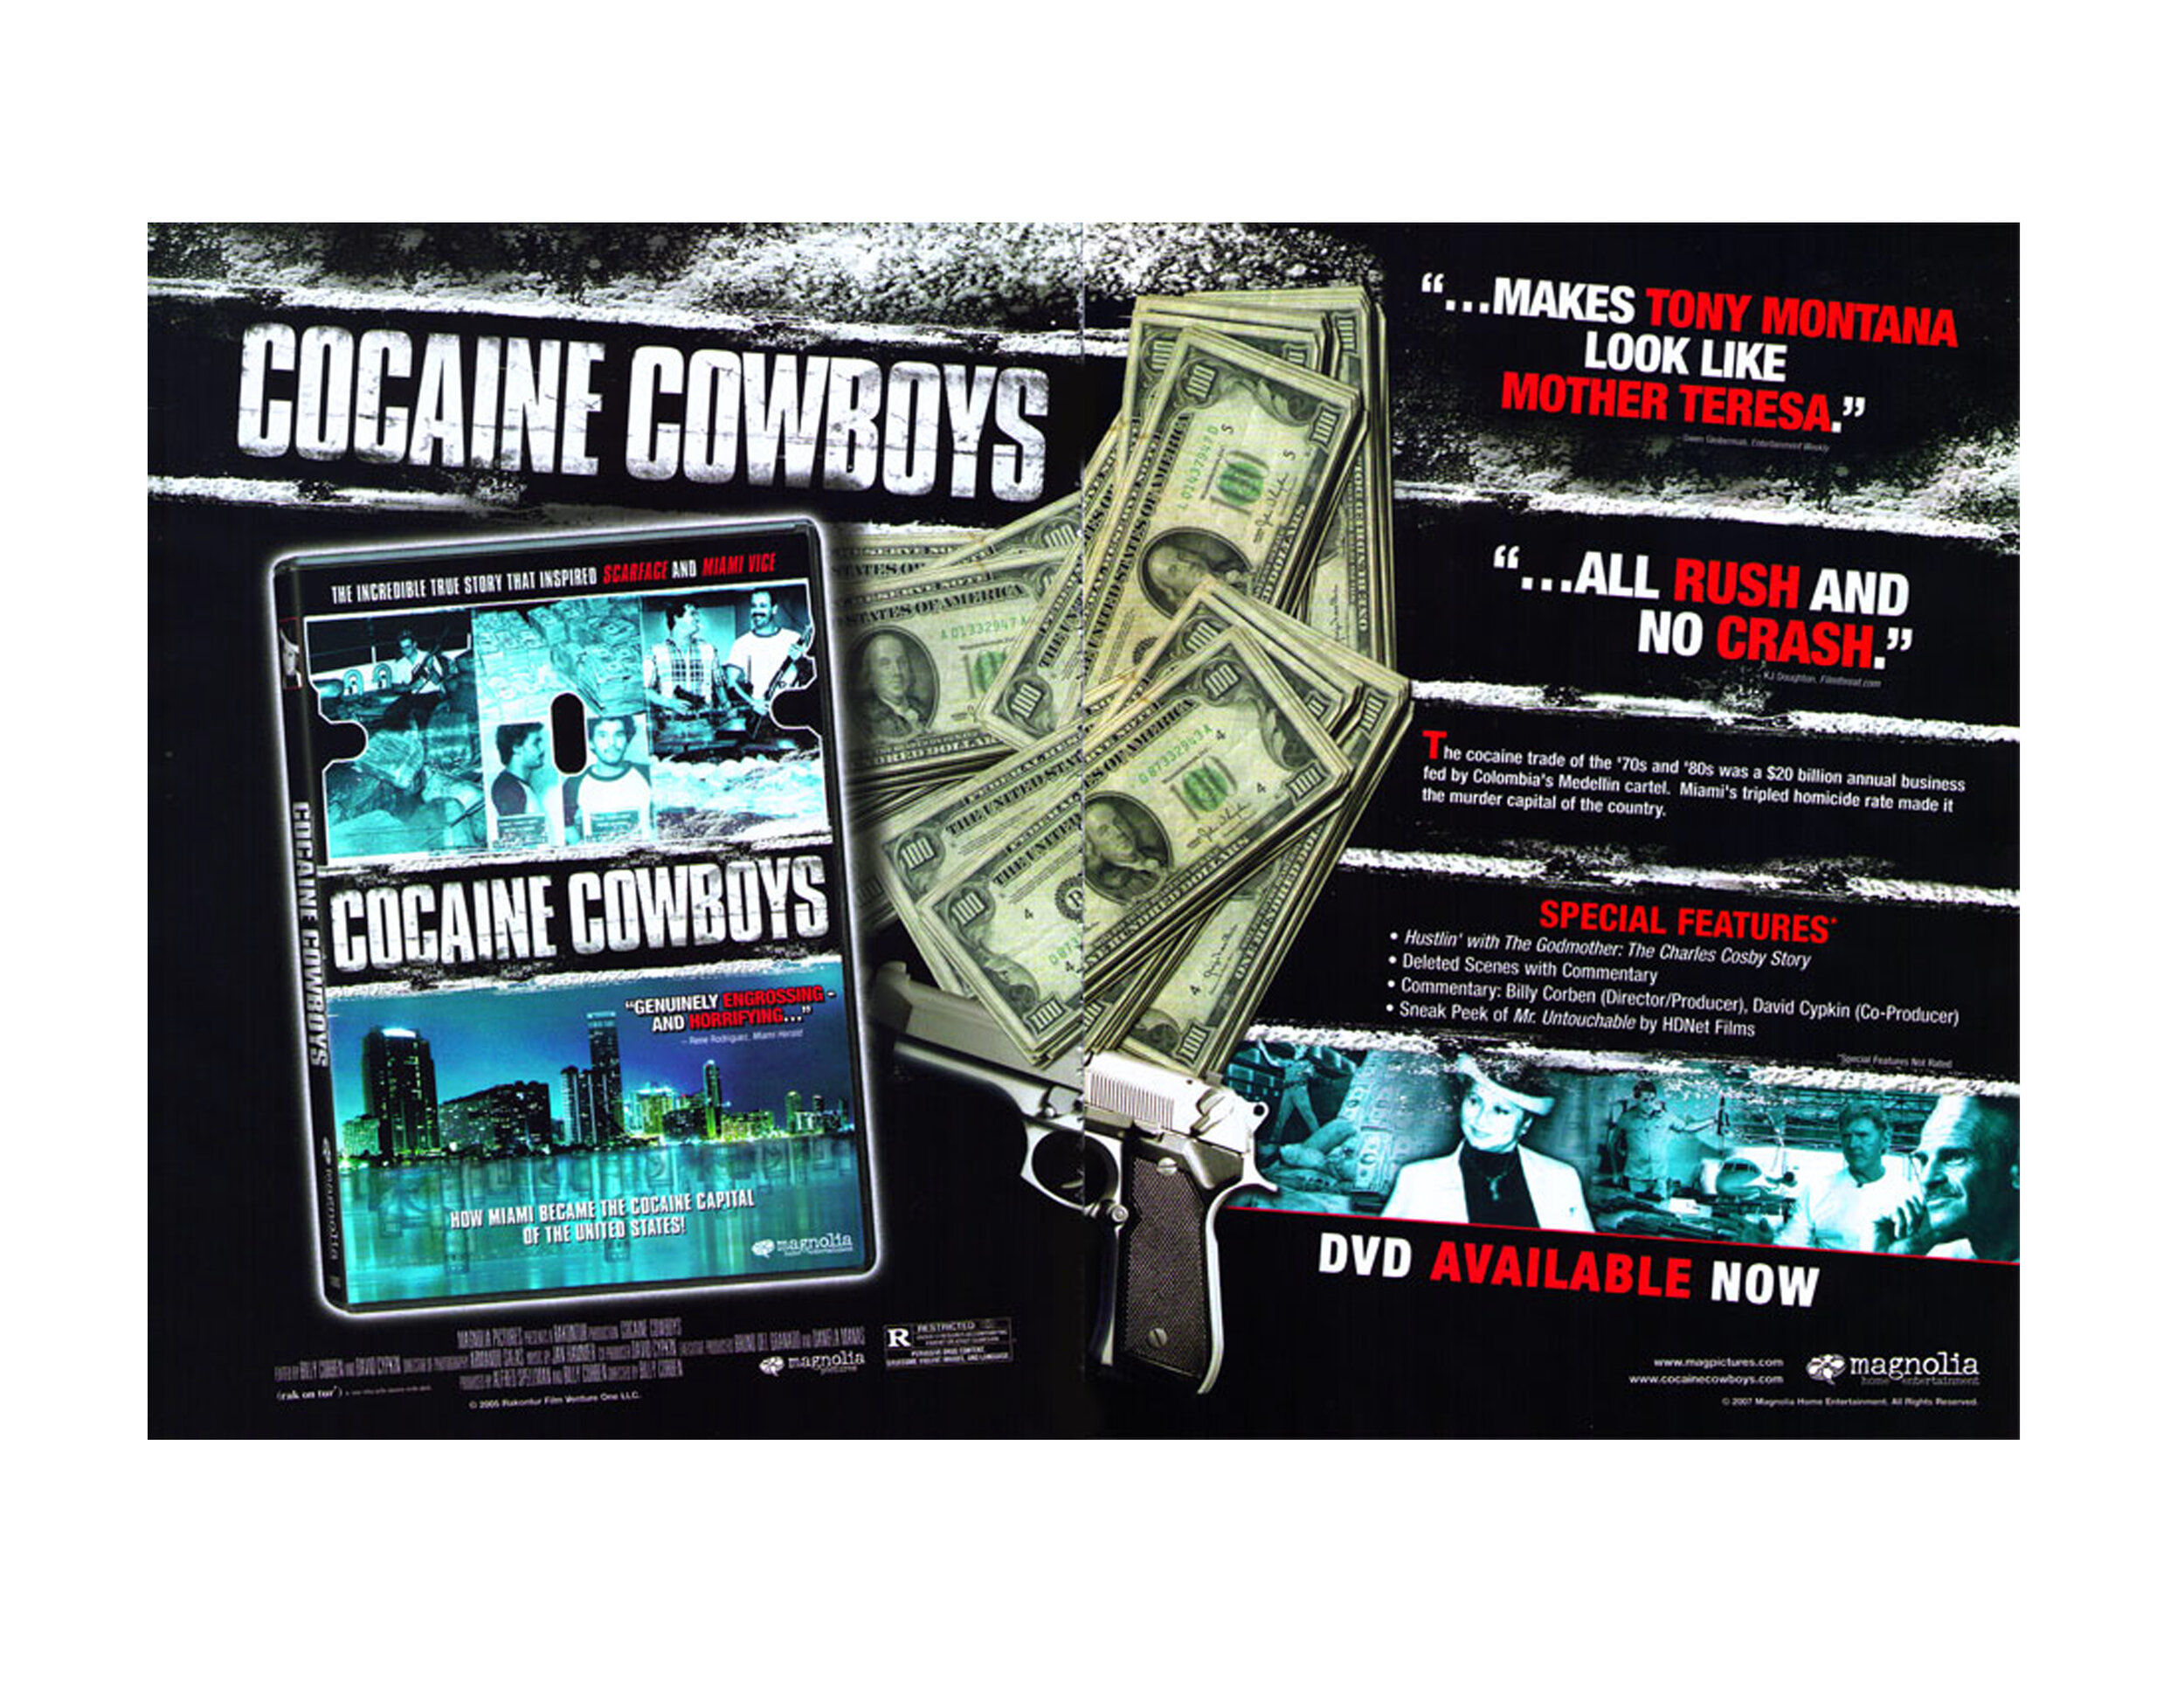 Cocaine Cowboys As Is ad